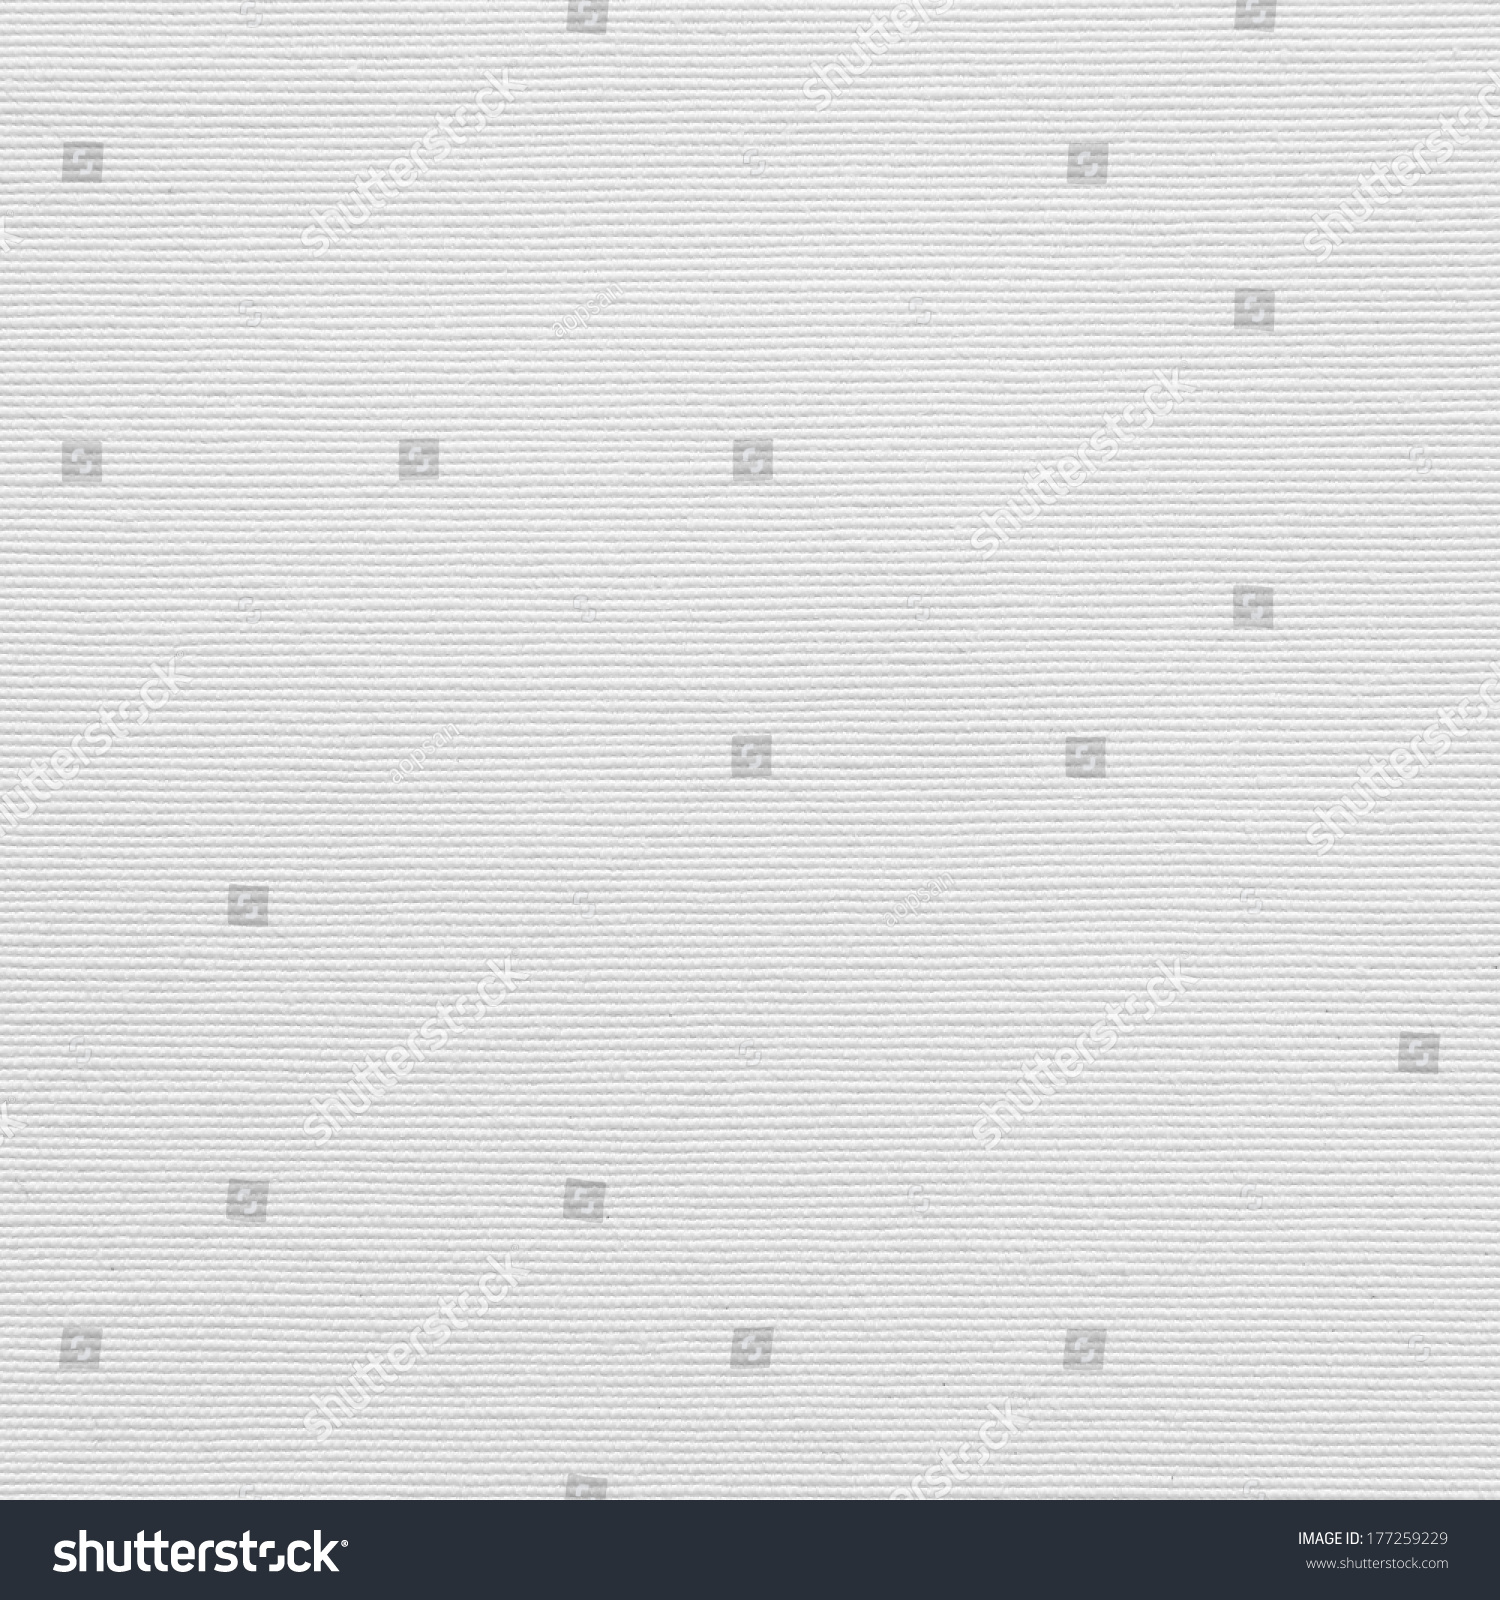 White fabric texture for background #177259229